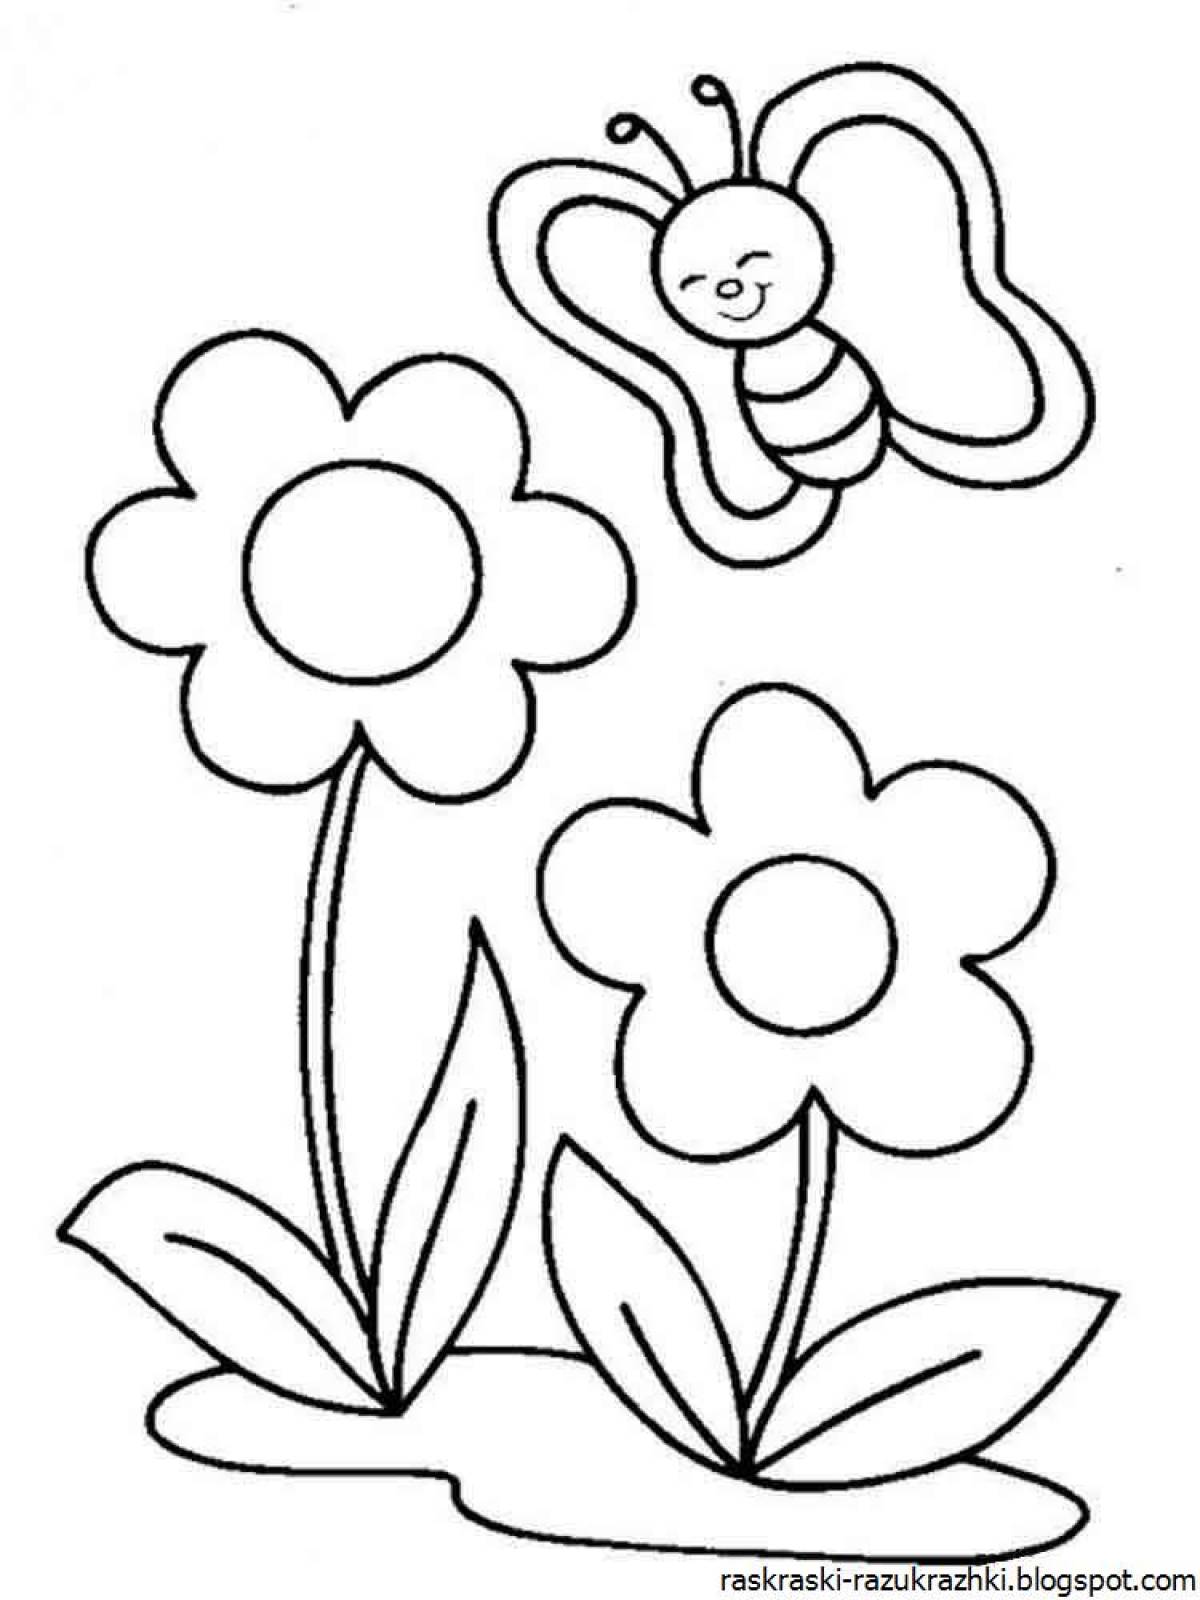 Unforgettable coloring flowers for children 4-5 years old